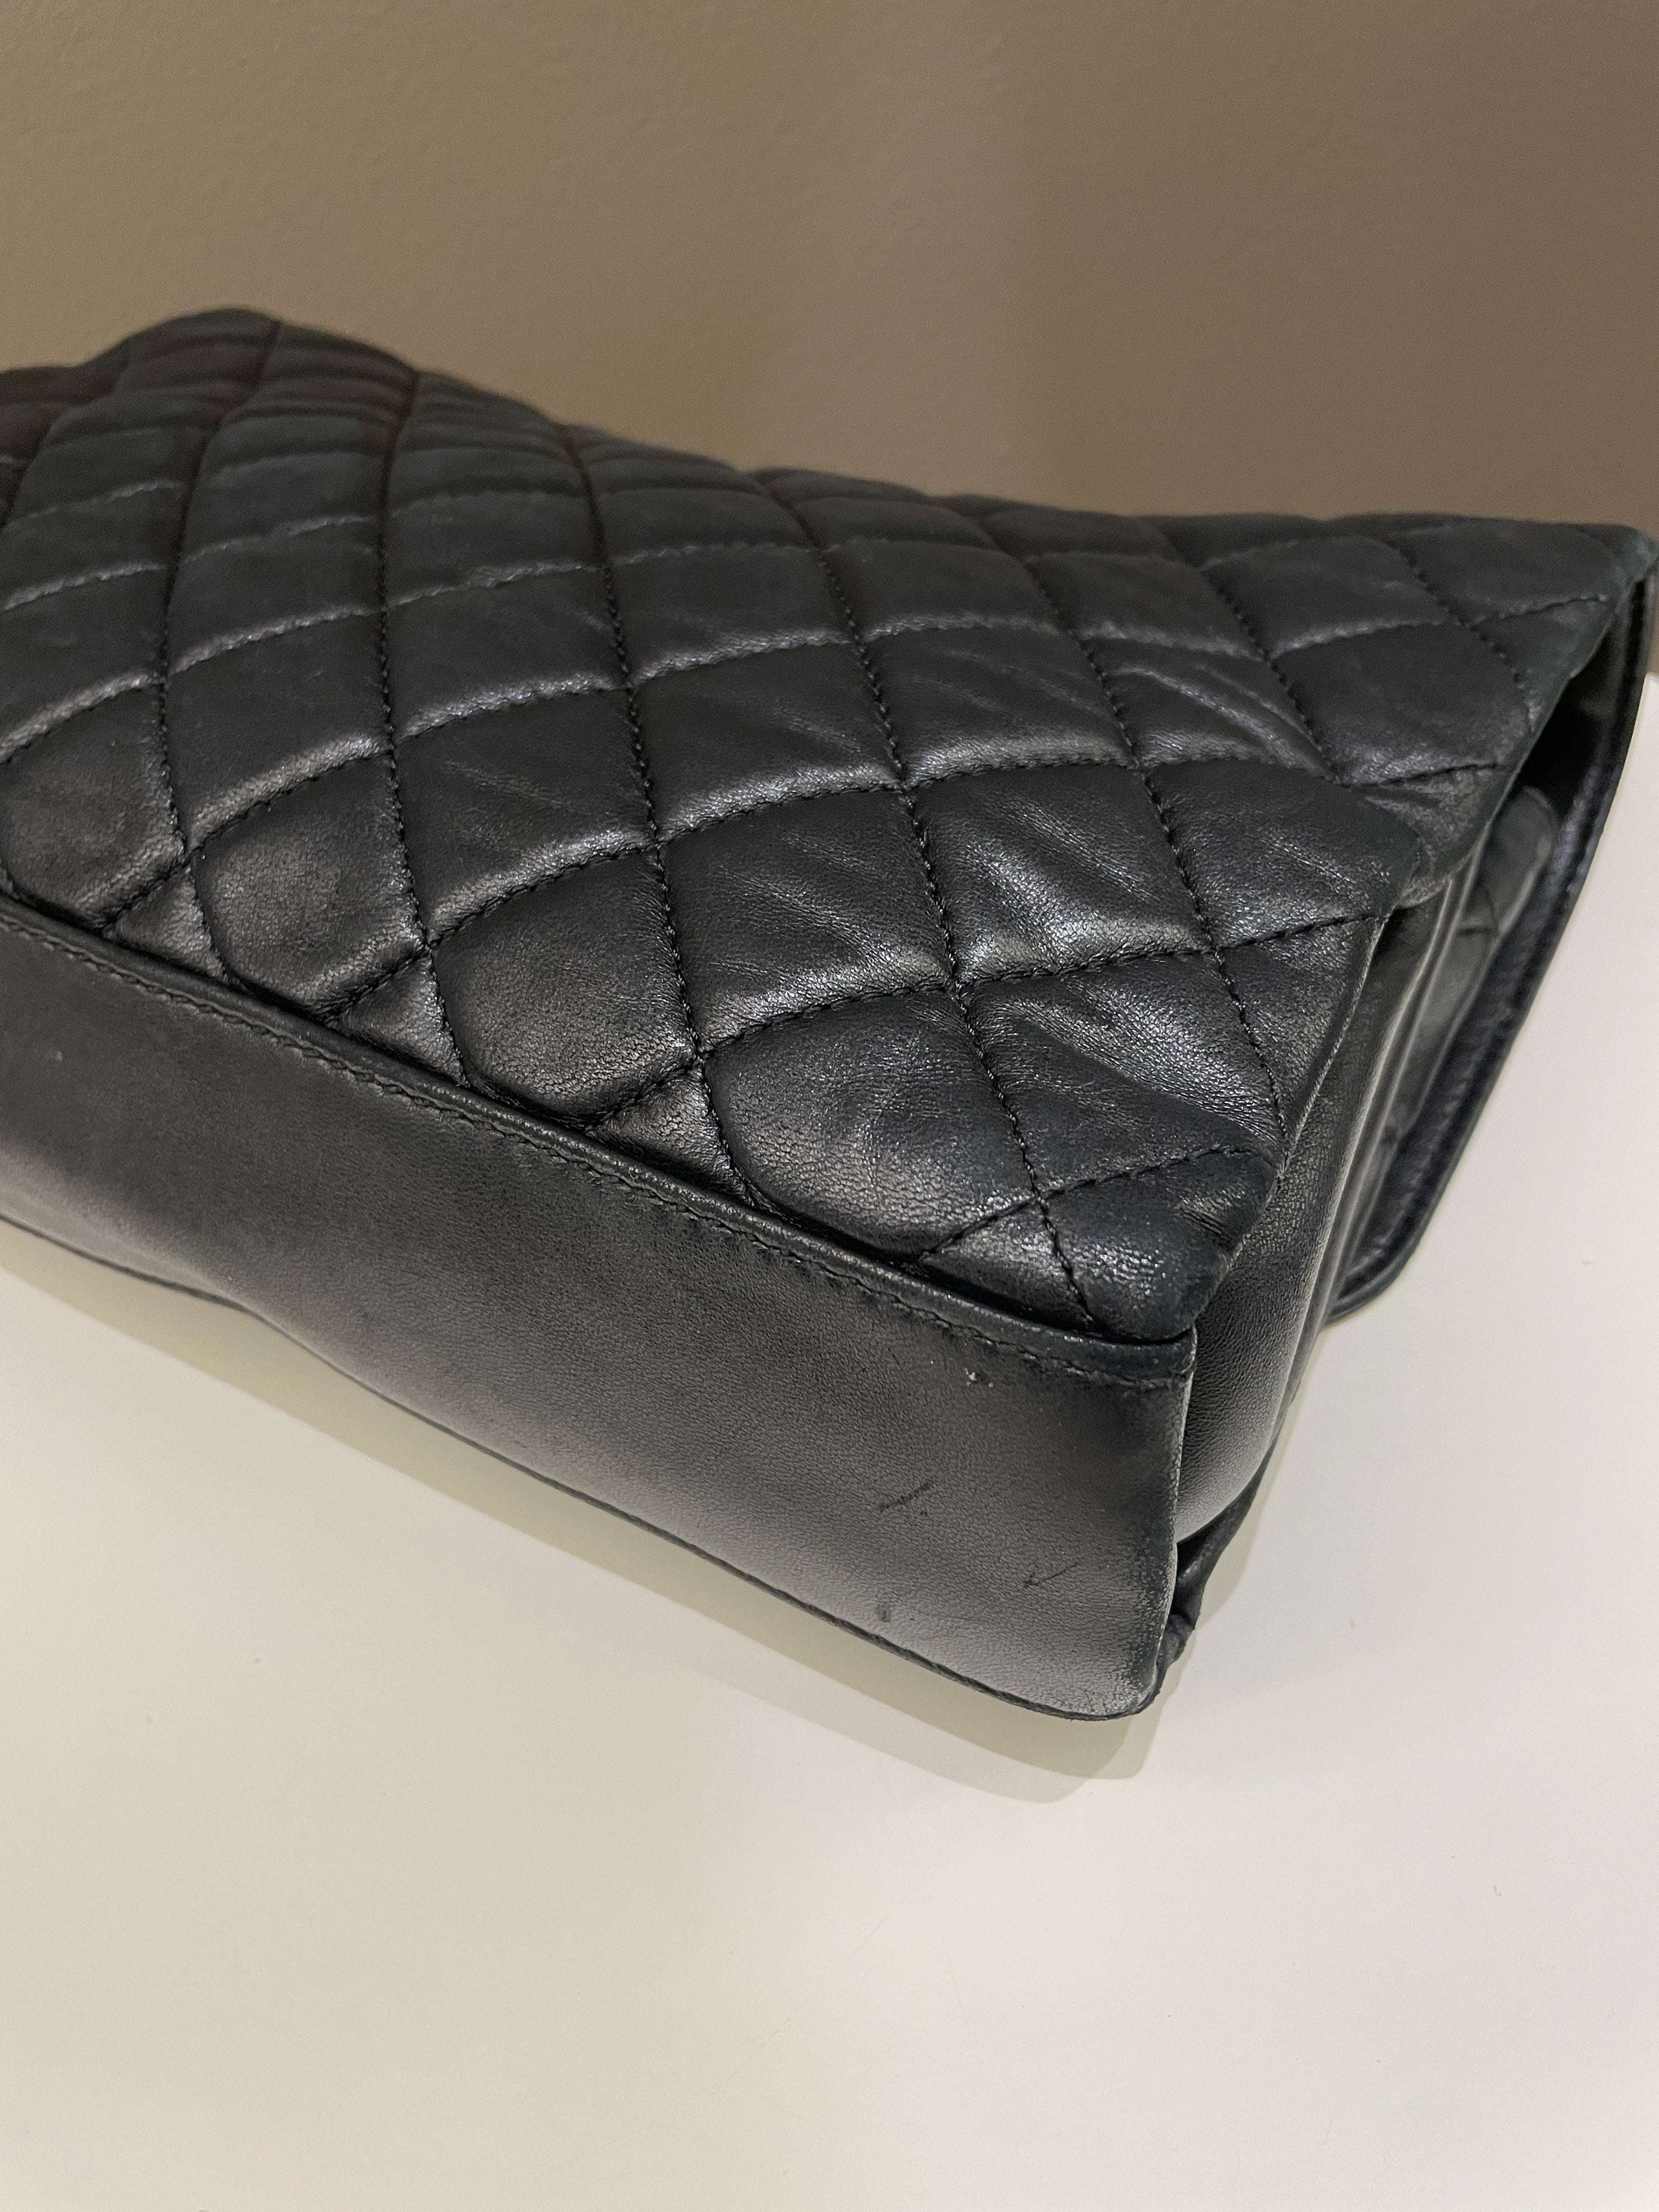 Chanel Quilted Jumbo Coco Loop Flap Dark Grey Lambskin Silver Hardware –  Coco Approved Studio